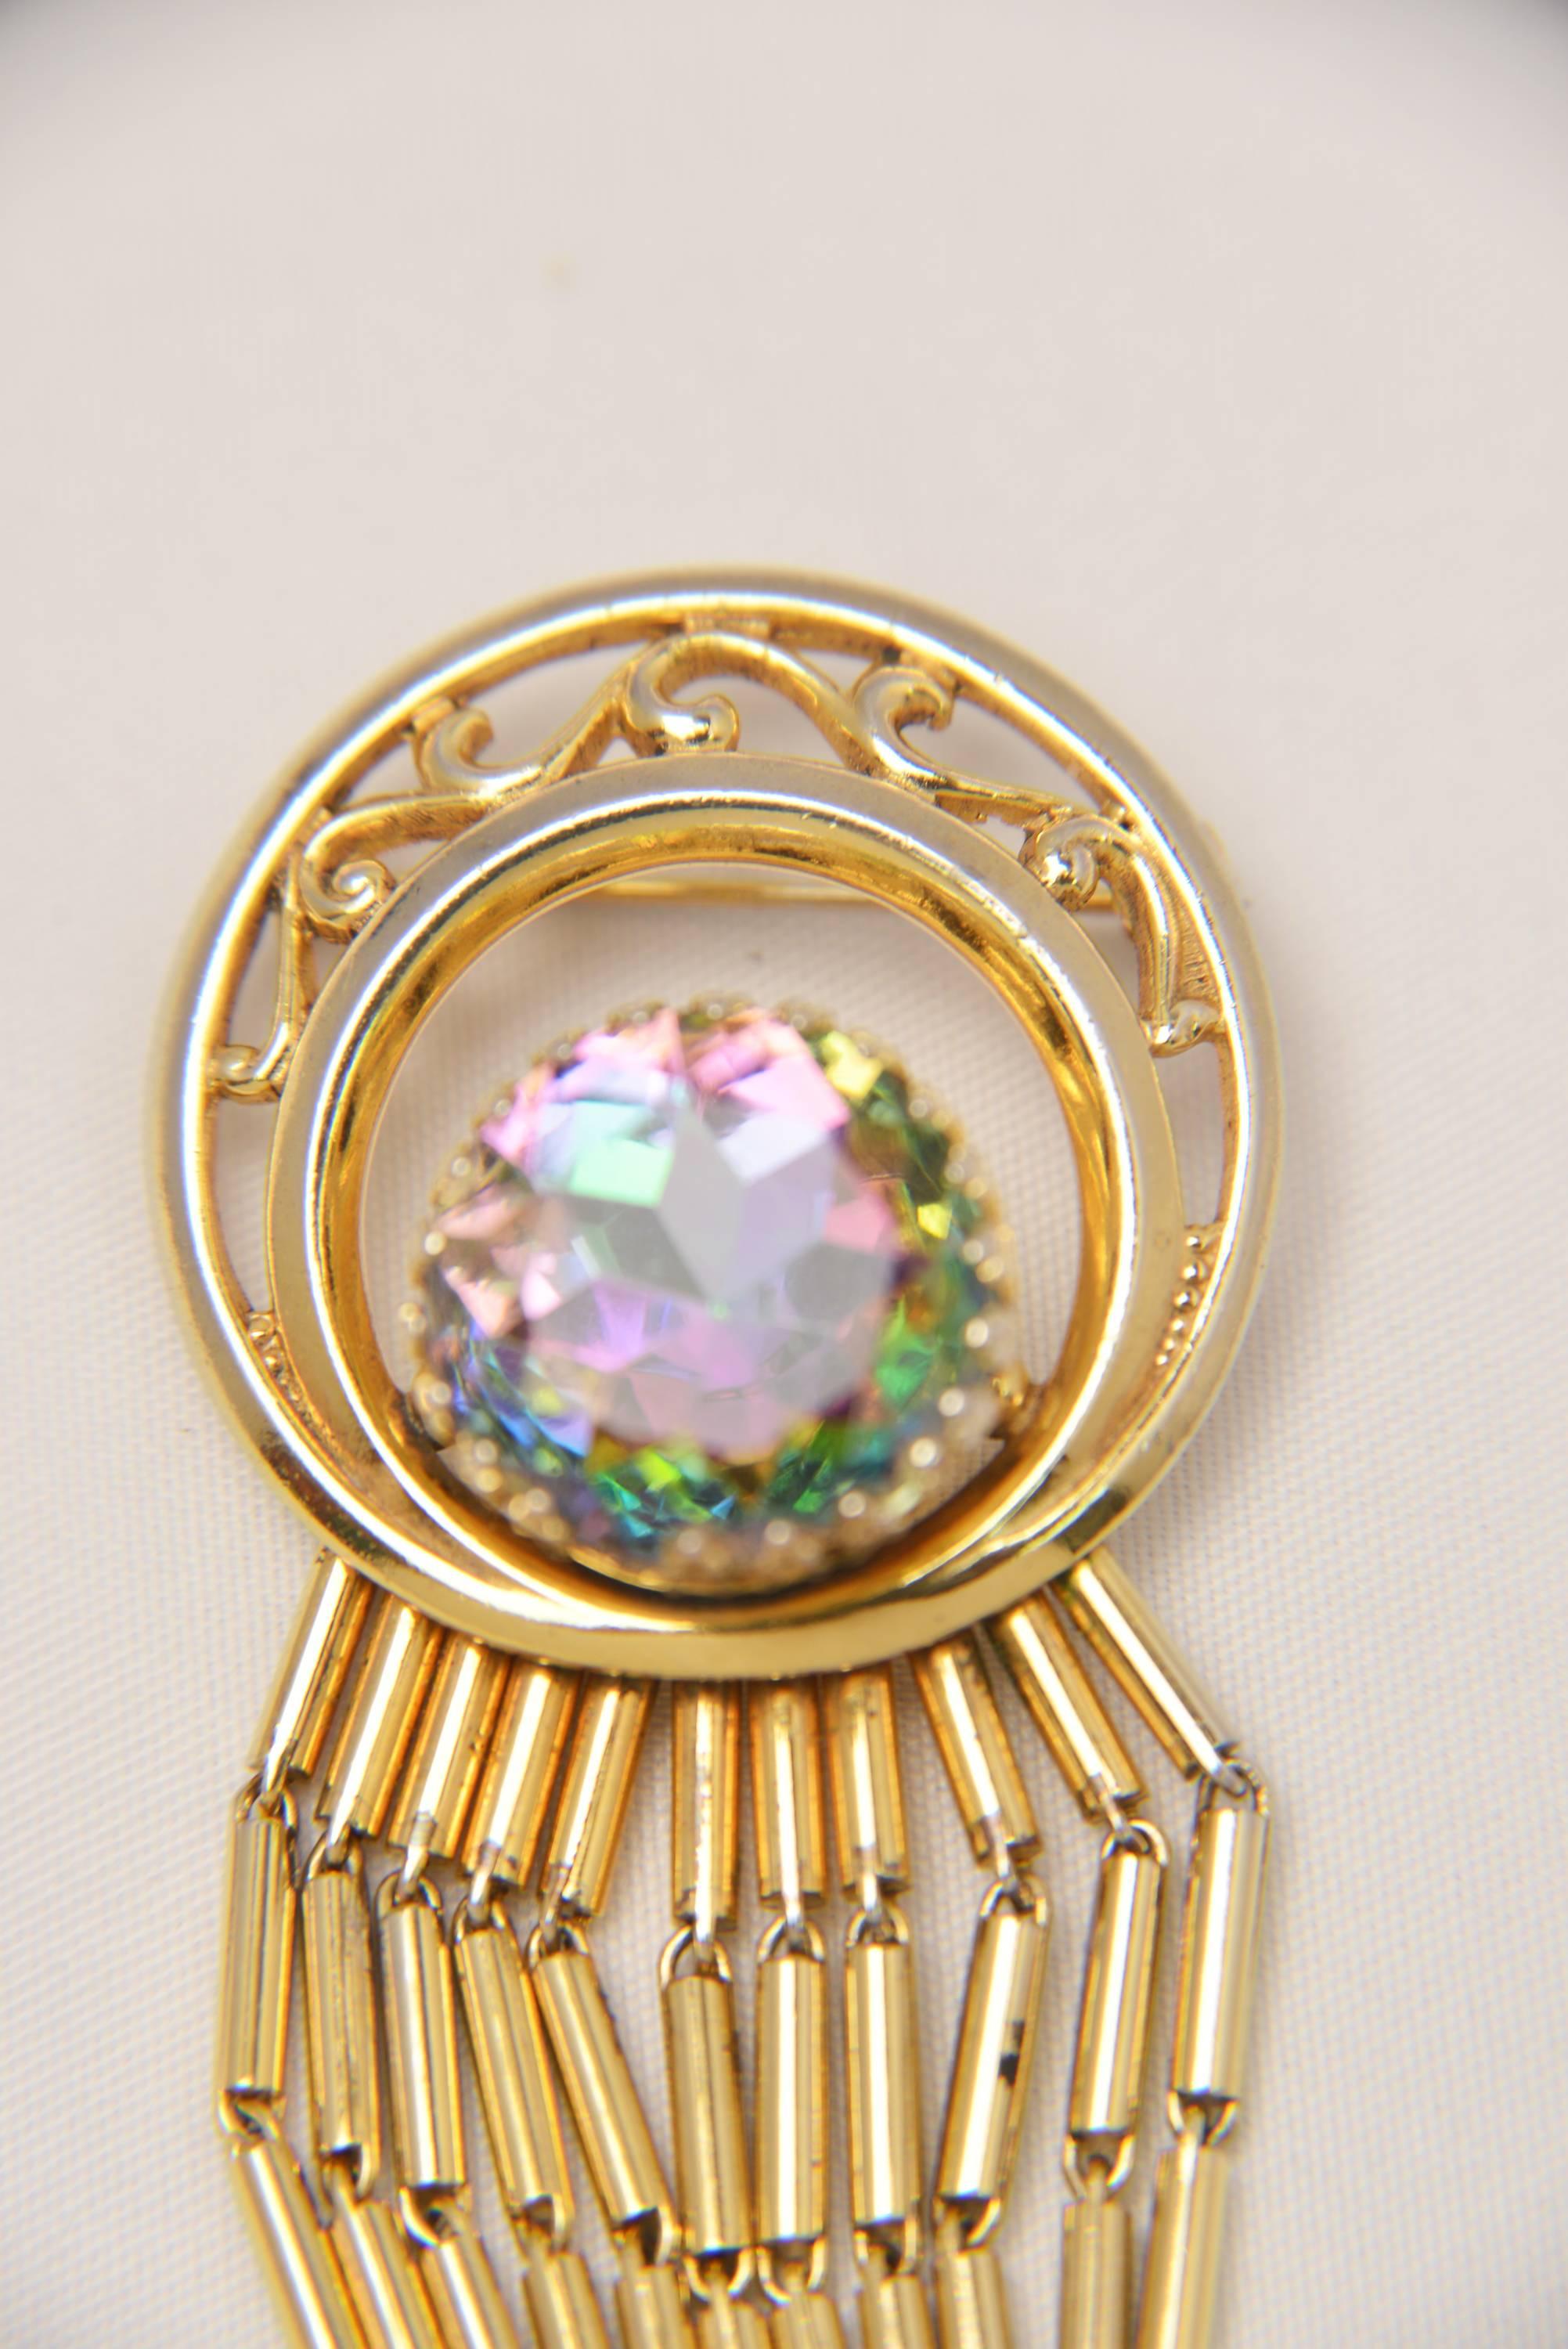 Fantastic watermelon tourmaline brooch. Designed by the iconic Elsa Schiaparelli who was friends with Salvador Dali. The asymmetrical gold metal bugle bead fringe hanging from a crescent moon shaped circle shows her humor as well as her 